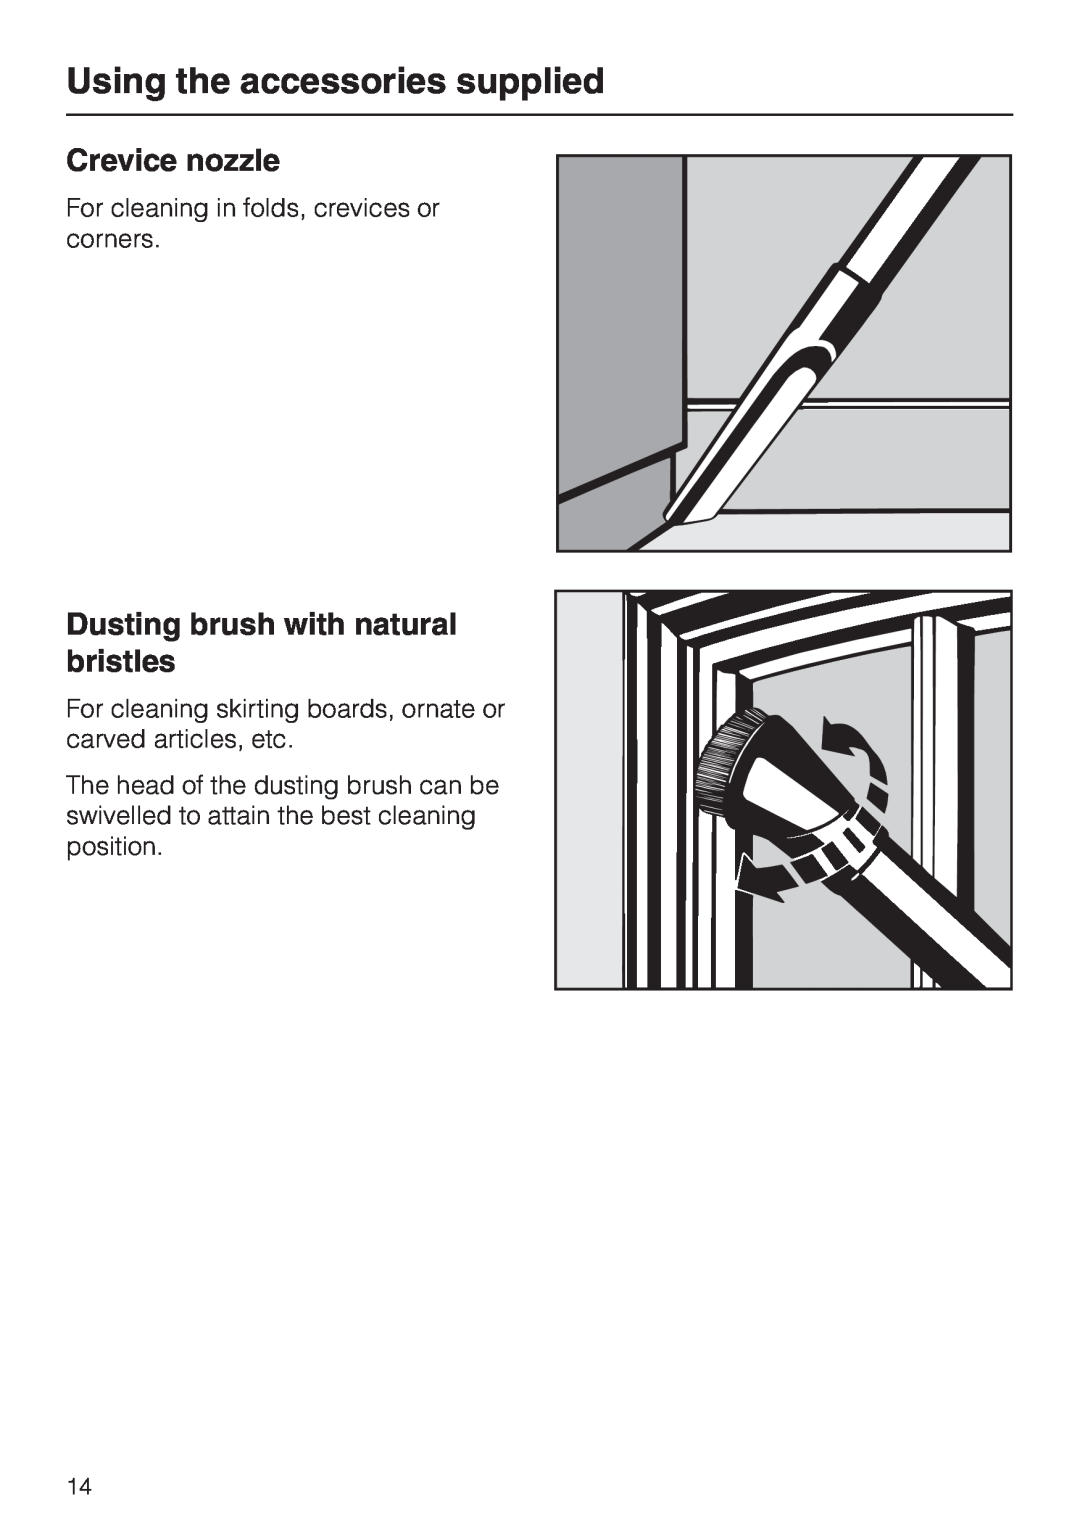 Miele S 5980 manual Using the accessories supplied, Crevice nozzle, Dusting brush with natural bristles 